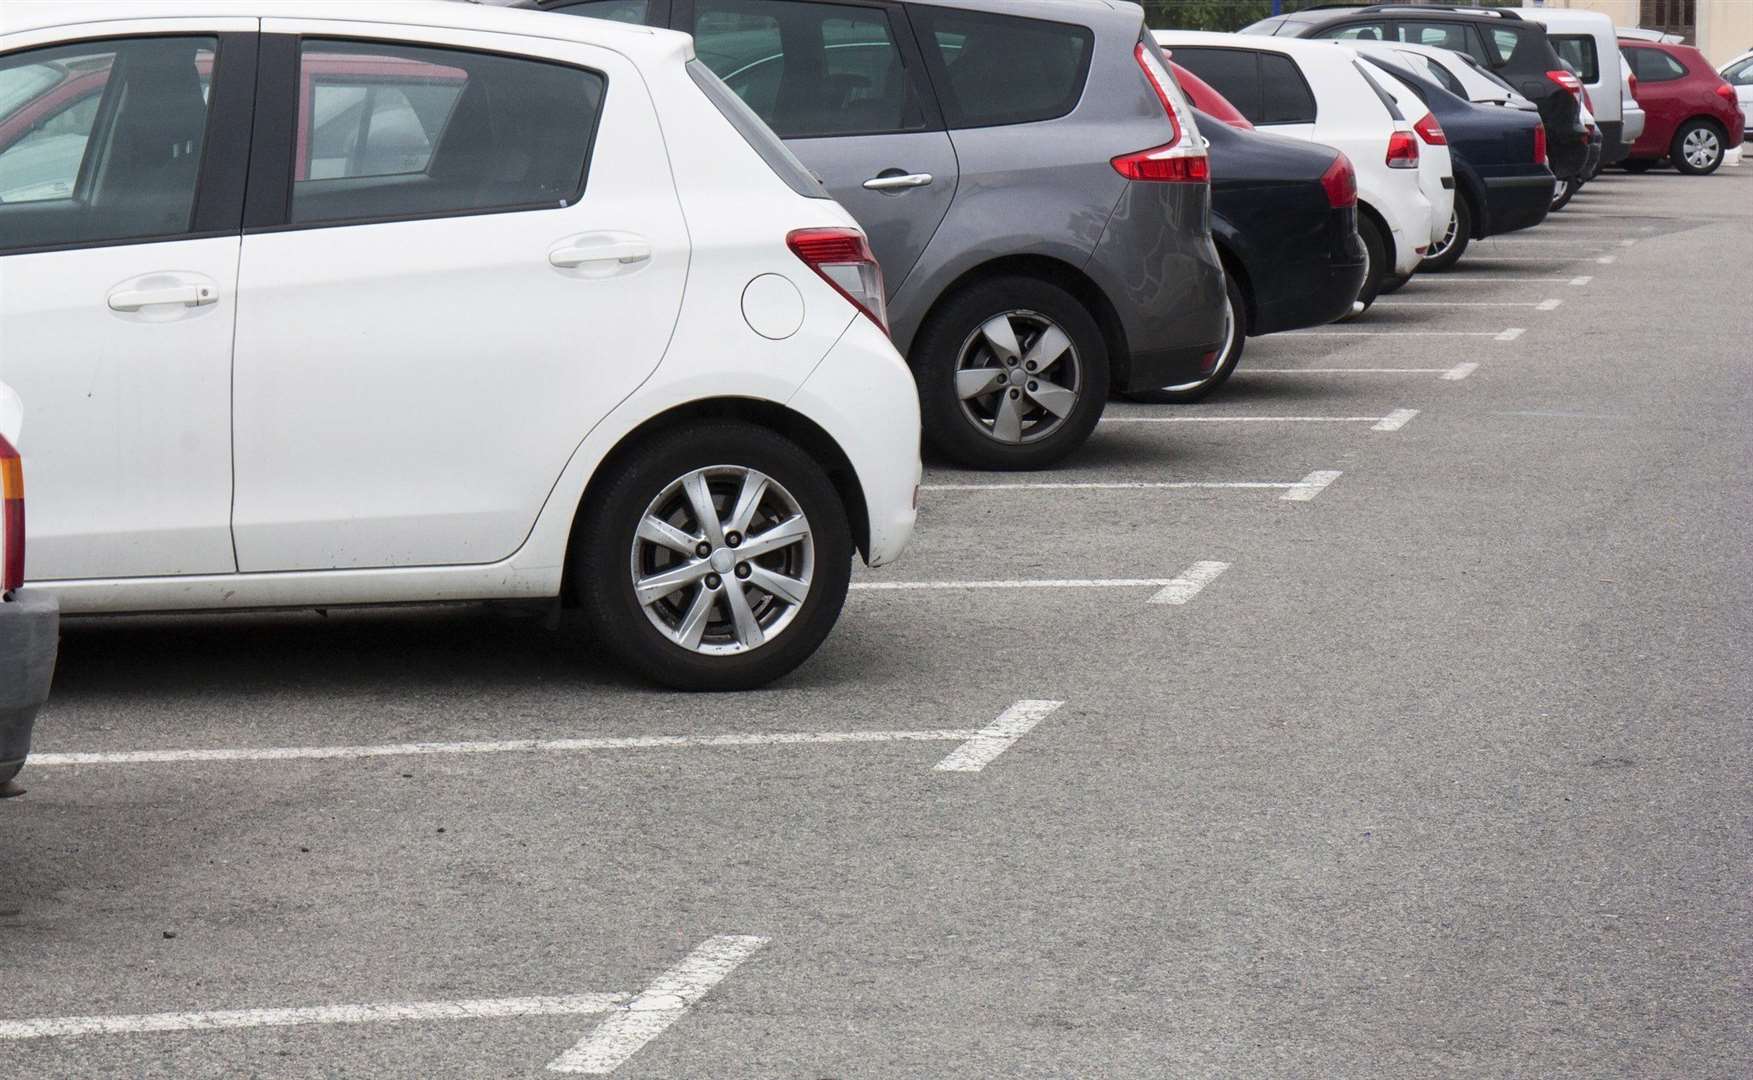 People parking legitimately at the supermarket should not be hit with a 'heavy-handed fine' for running a couple of minutes late says one minister. Photo: Stock photo.